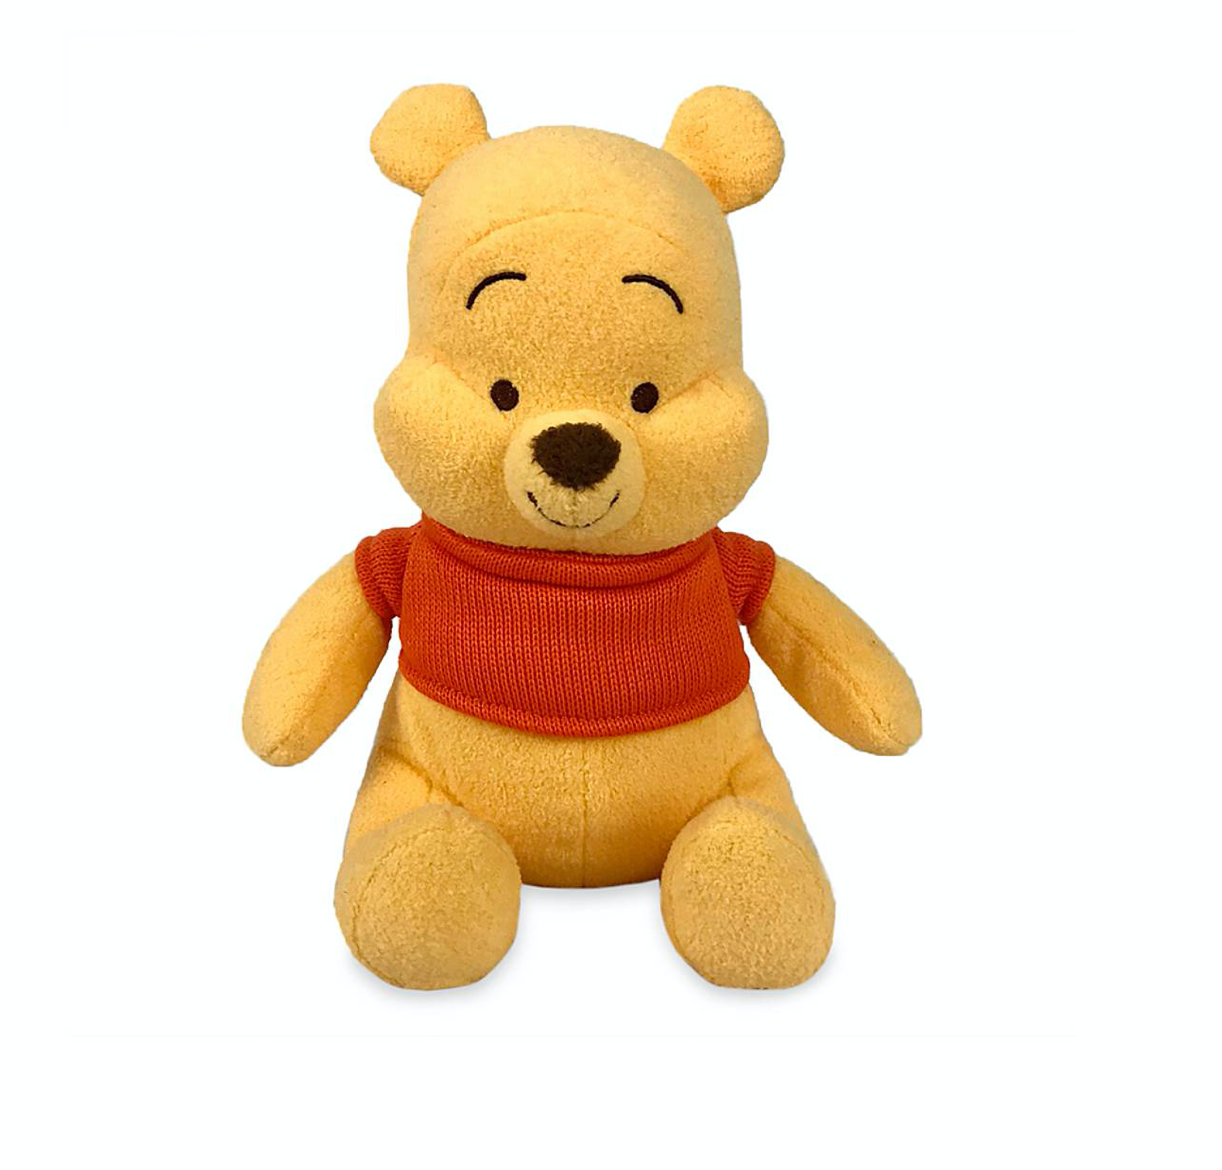 Disney Baby Winnie the Pooh Rattle Plush Plush New with Tag